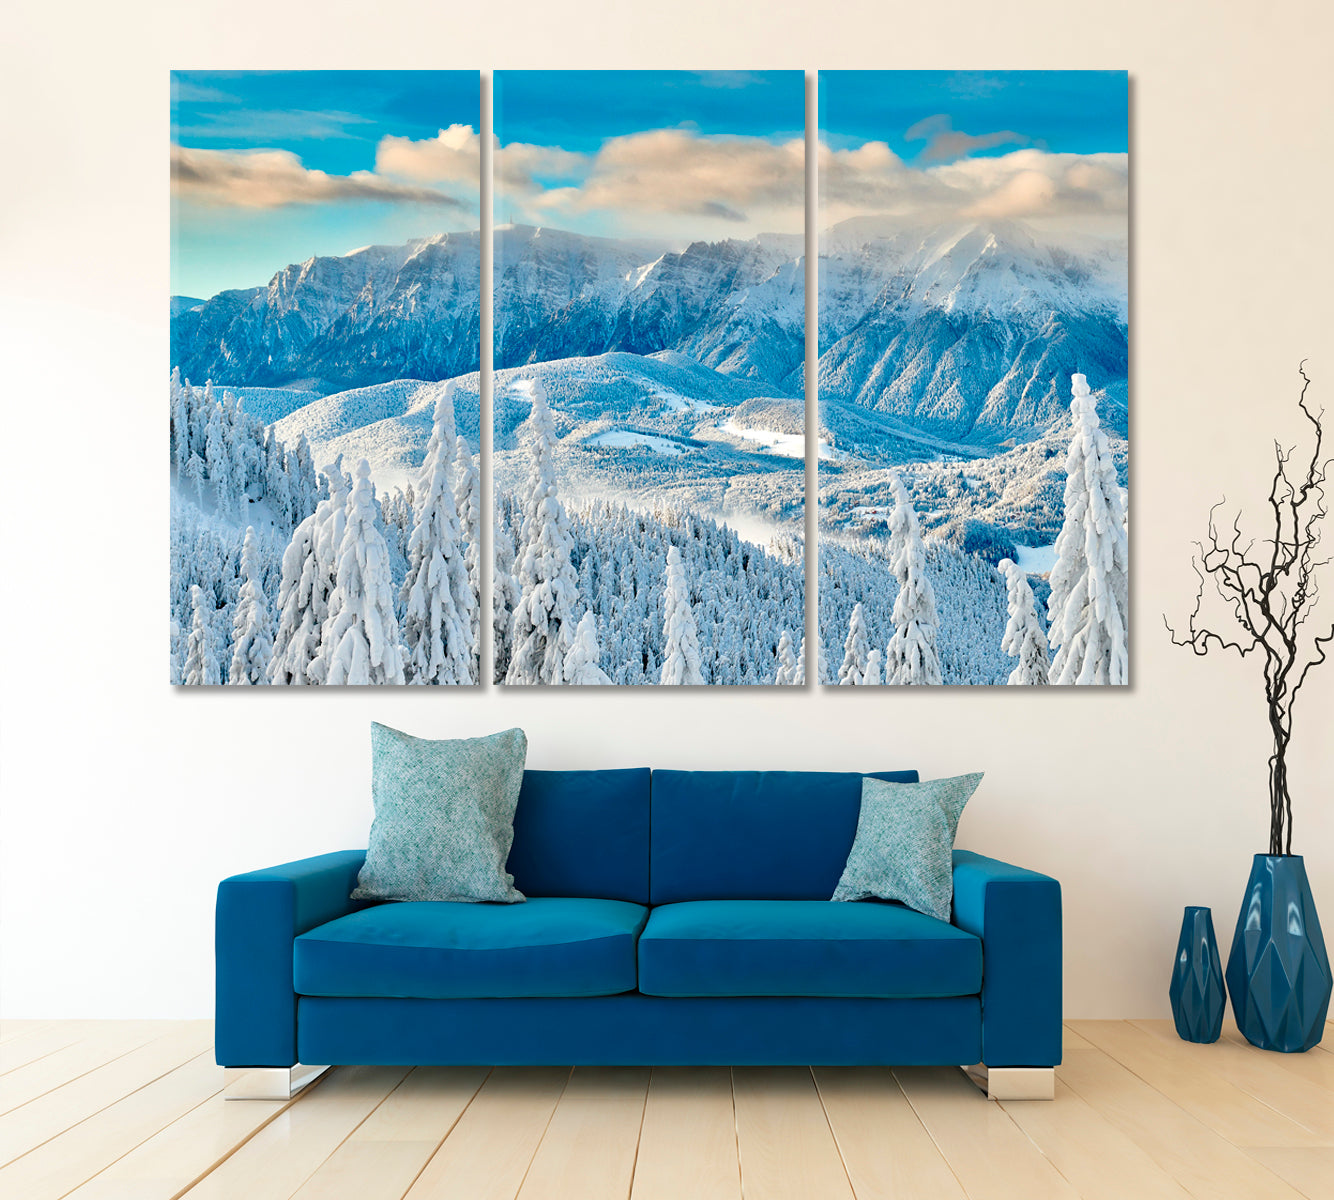 Mountain Winter Landscape Over The Ski Slope Panoramic View Poster Scenery Landscape Fine Art Print Artesty 3 panels 36" x 24" 